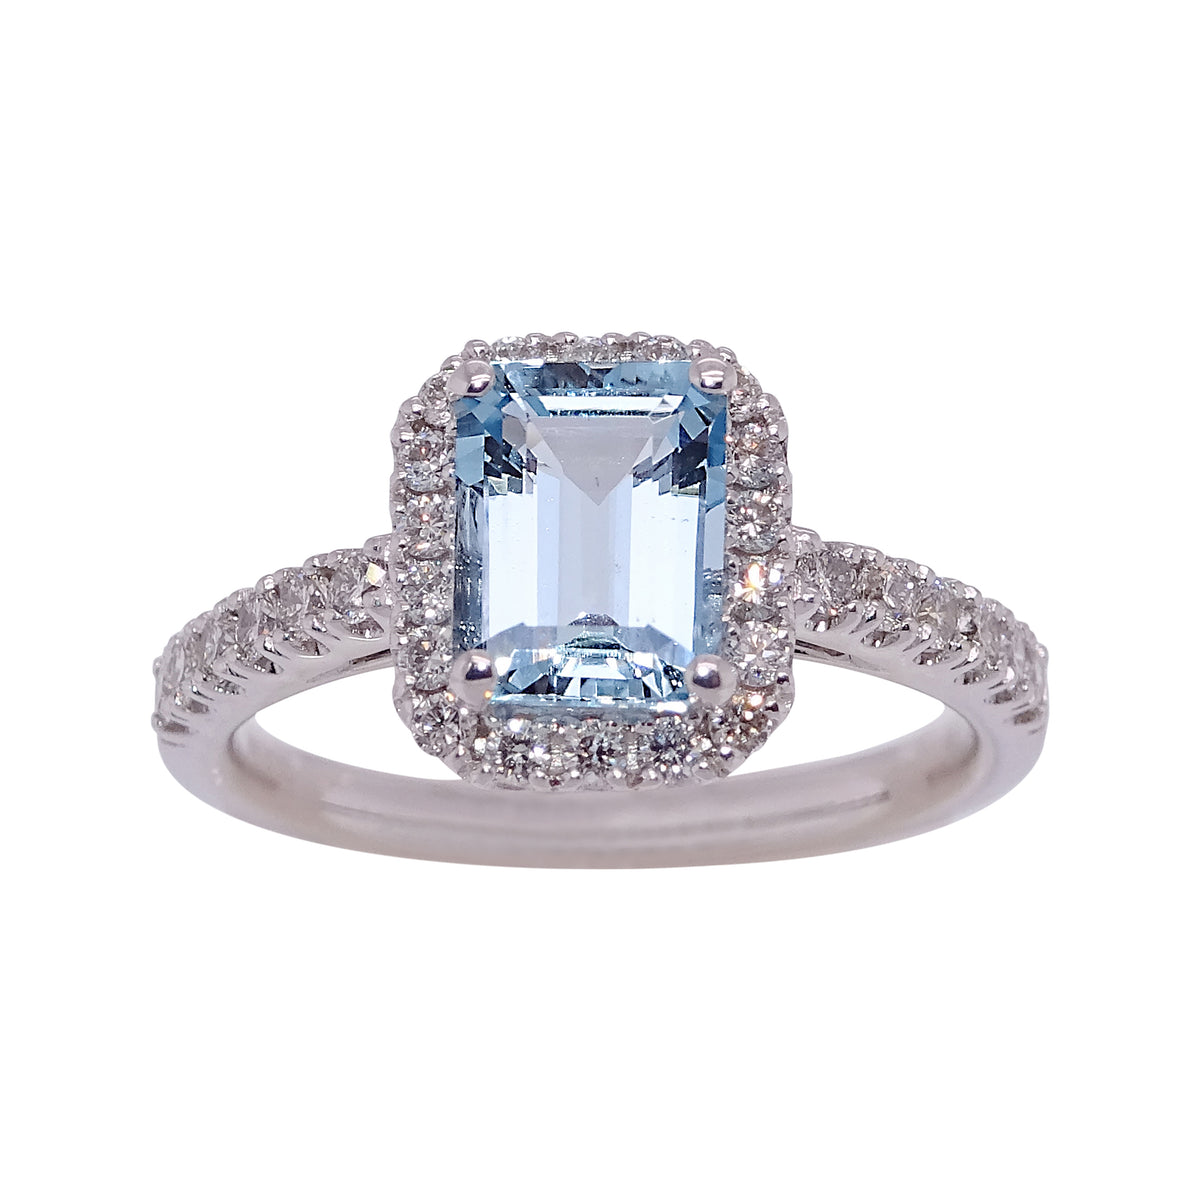 18ct white gold 1.48ct octagonal cut aquamarine ( 8.09*6.10*4.04mm) &amp; diamond cluster ring with diamond shoulders 0.50ct Size O